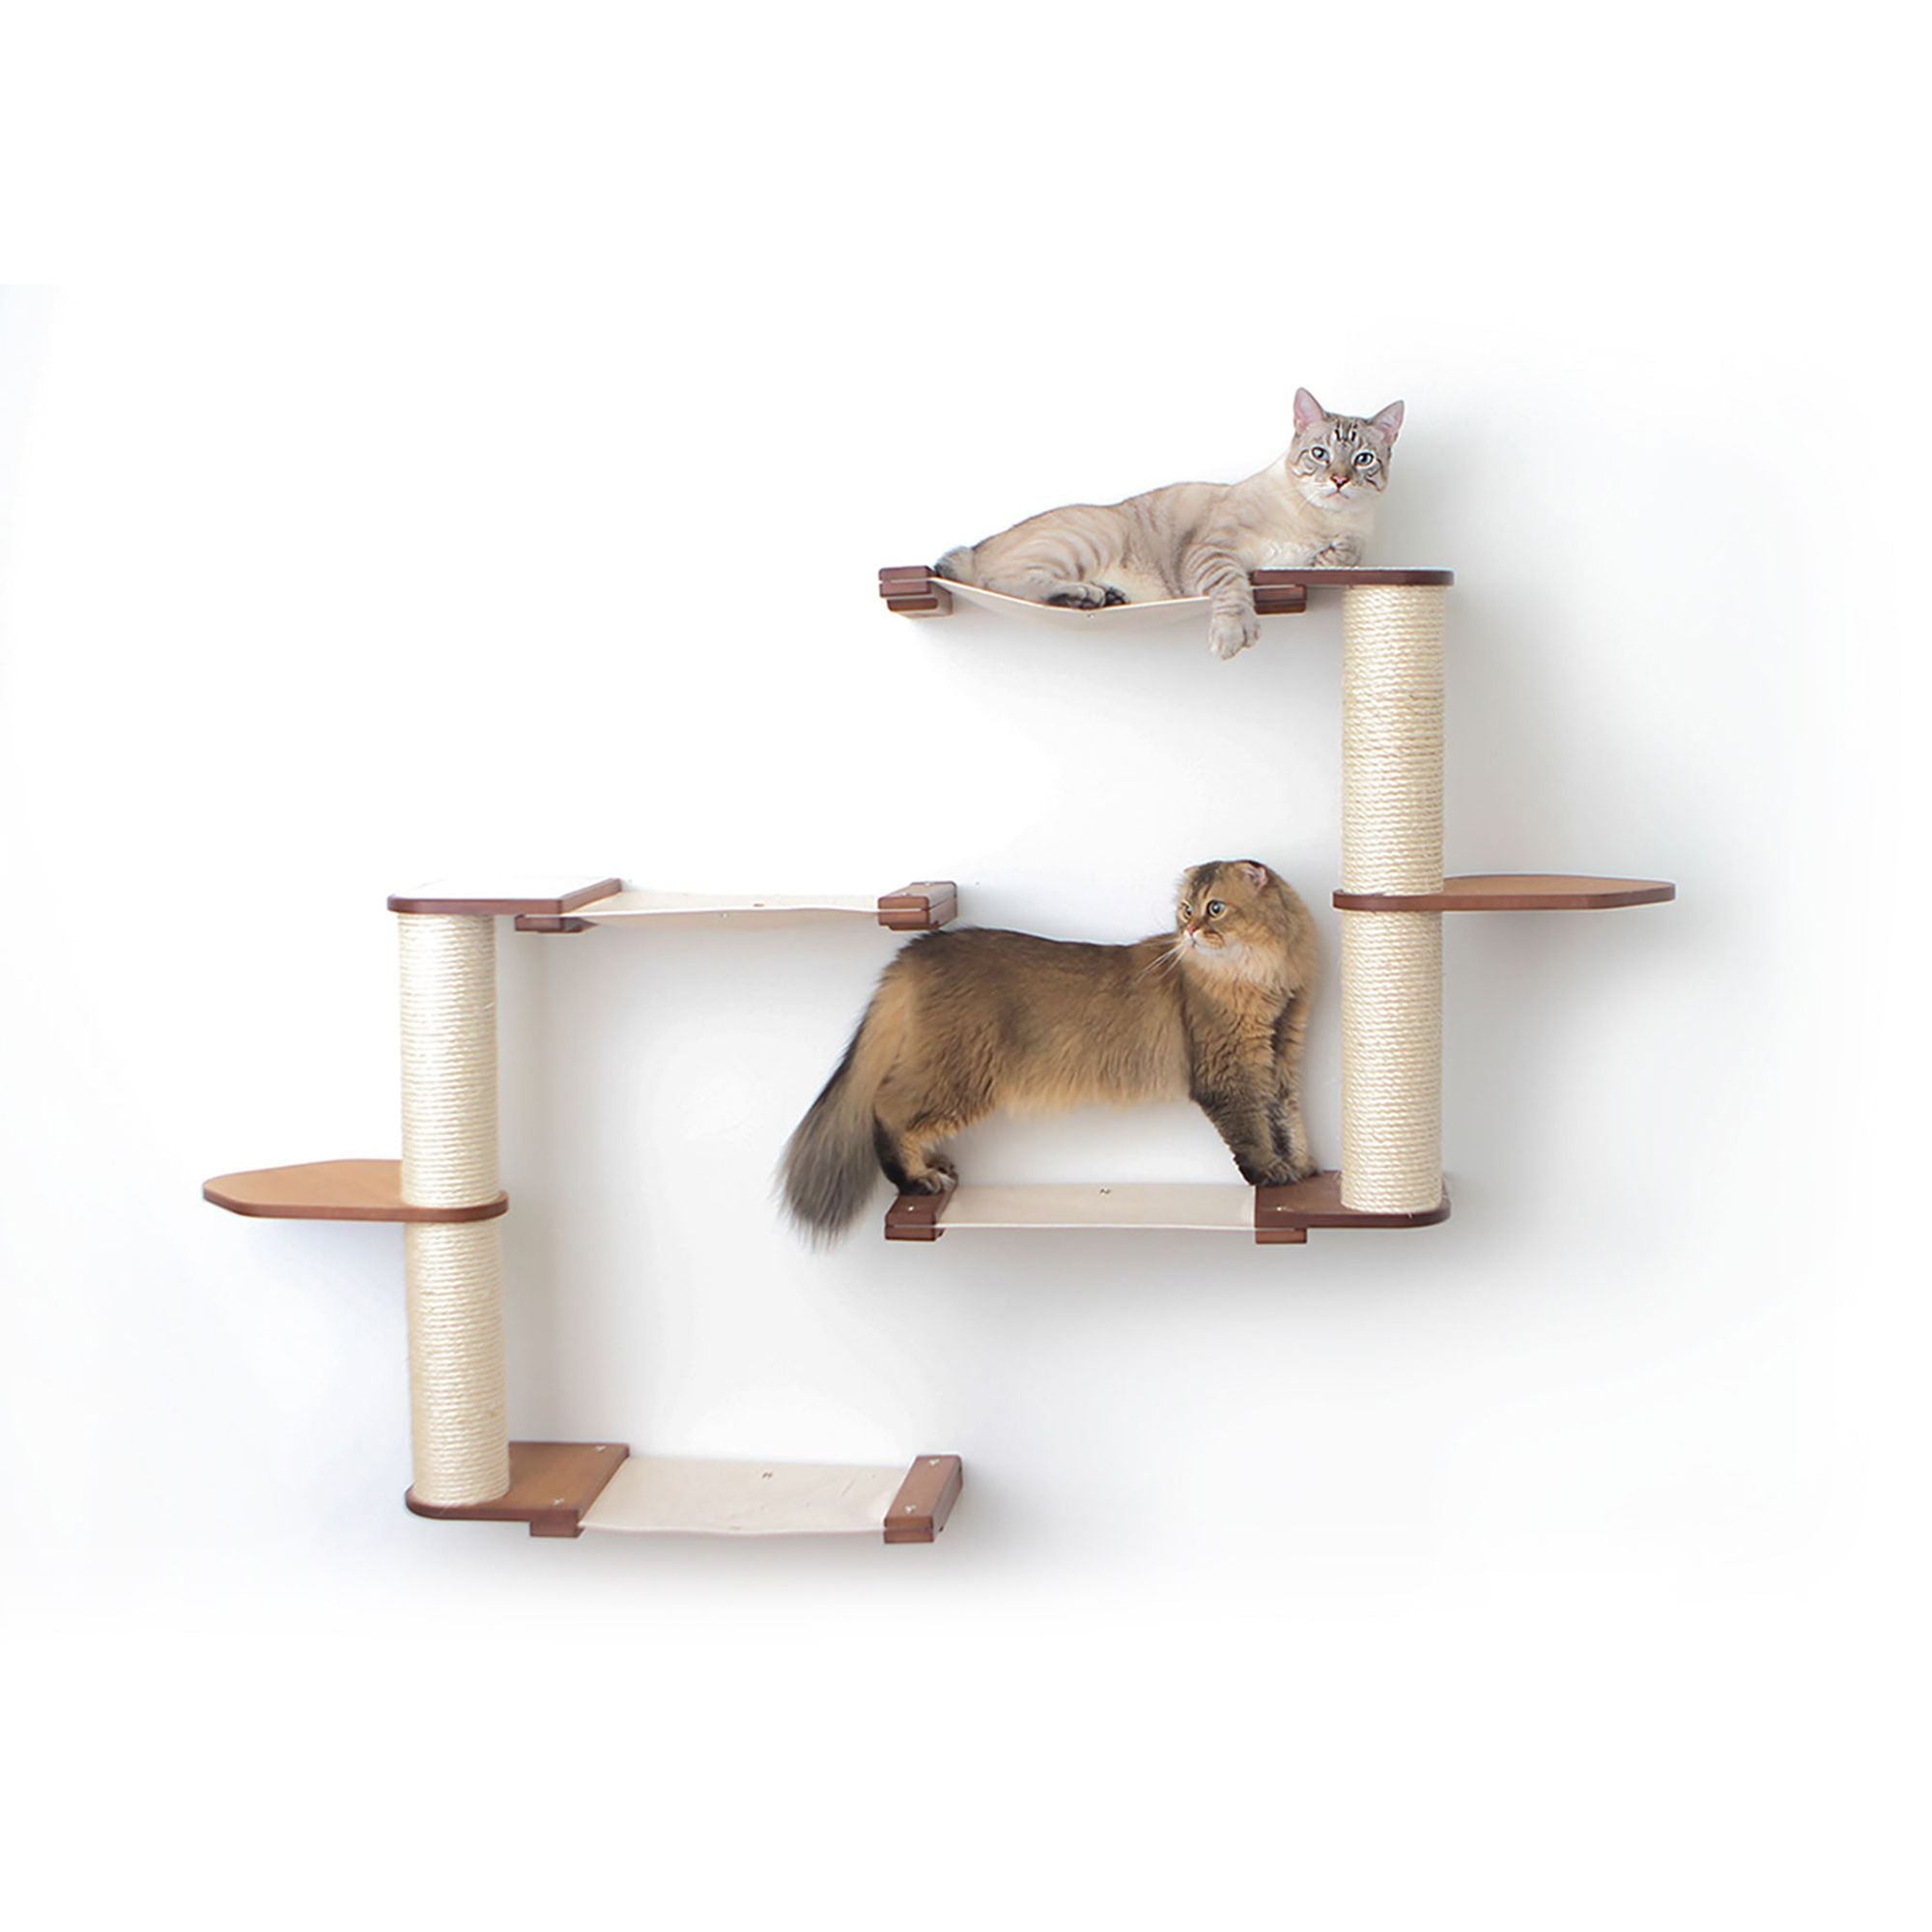 The Catacombs Cat Condo: Cat Scratcher Lounge by Catastrophic Creations